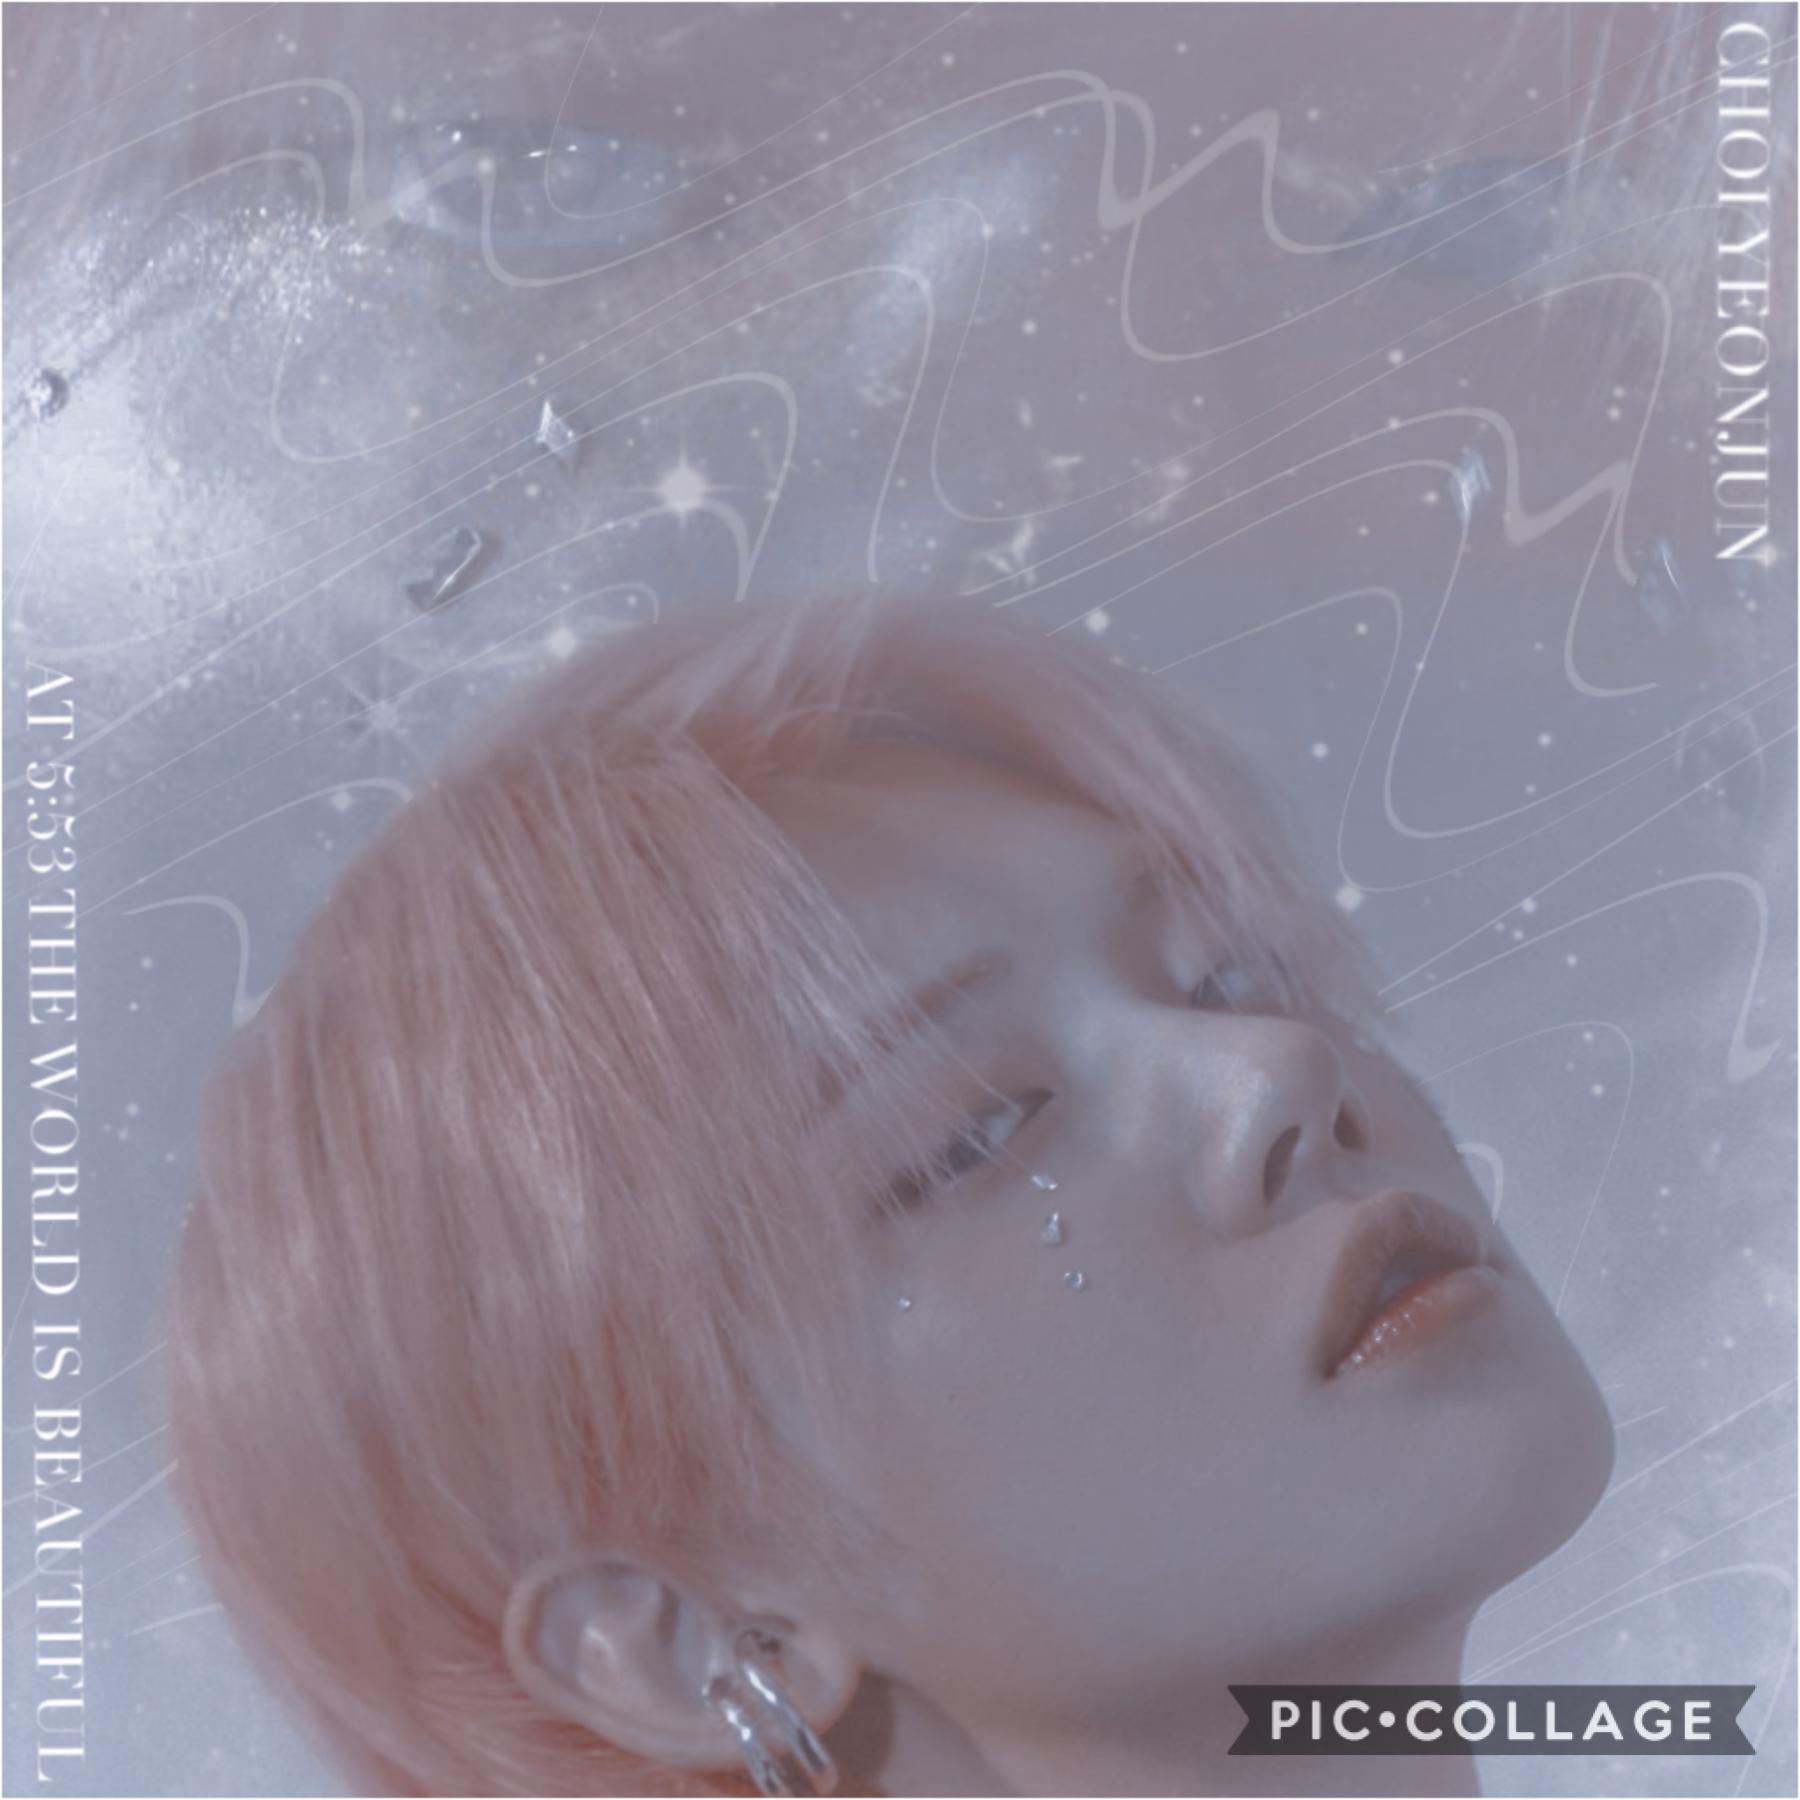 •••
нelloooo
minisode1: Blue Hour ιѕ a мaѕтerpιece istg i love all of the songs and i seriously cant choose a favorite song. the mv for blue hour was so beautiful and i couldn’t stop smiling the entire time. this is honestly my fav comeback yet, all the m